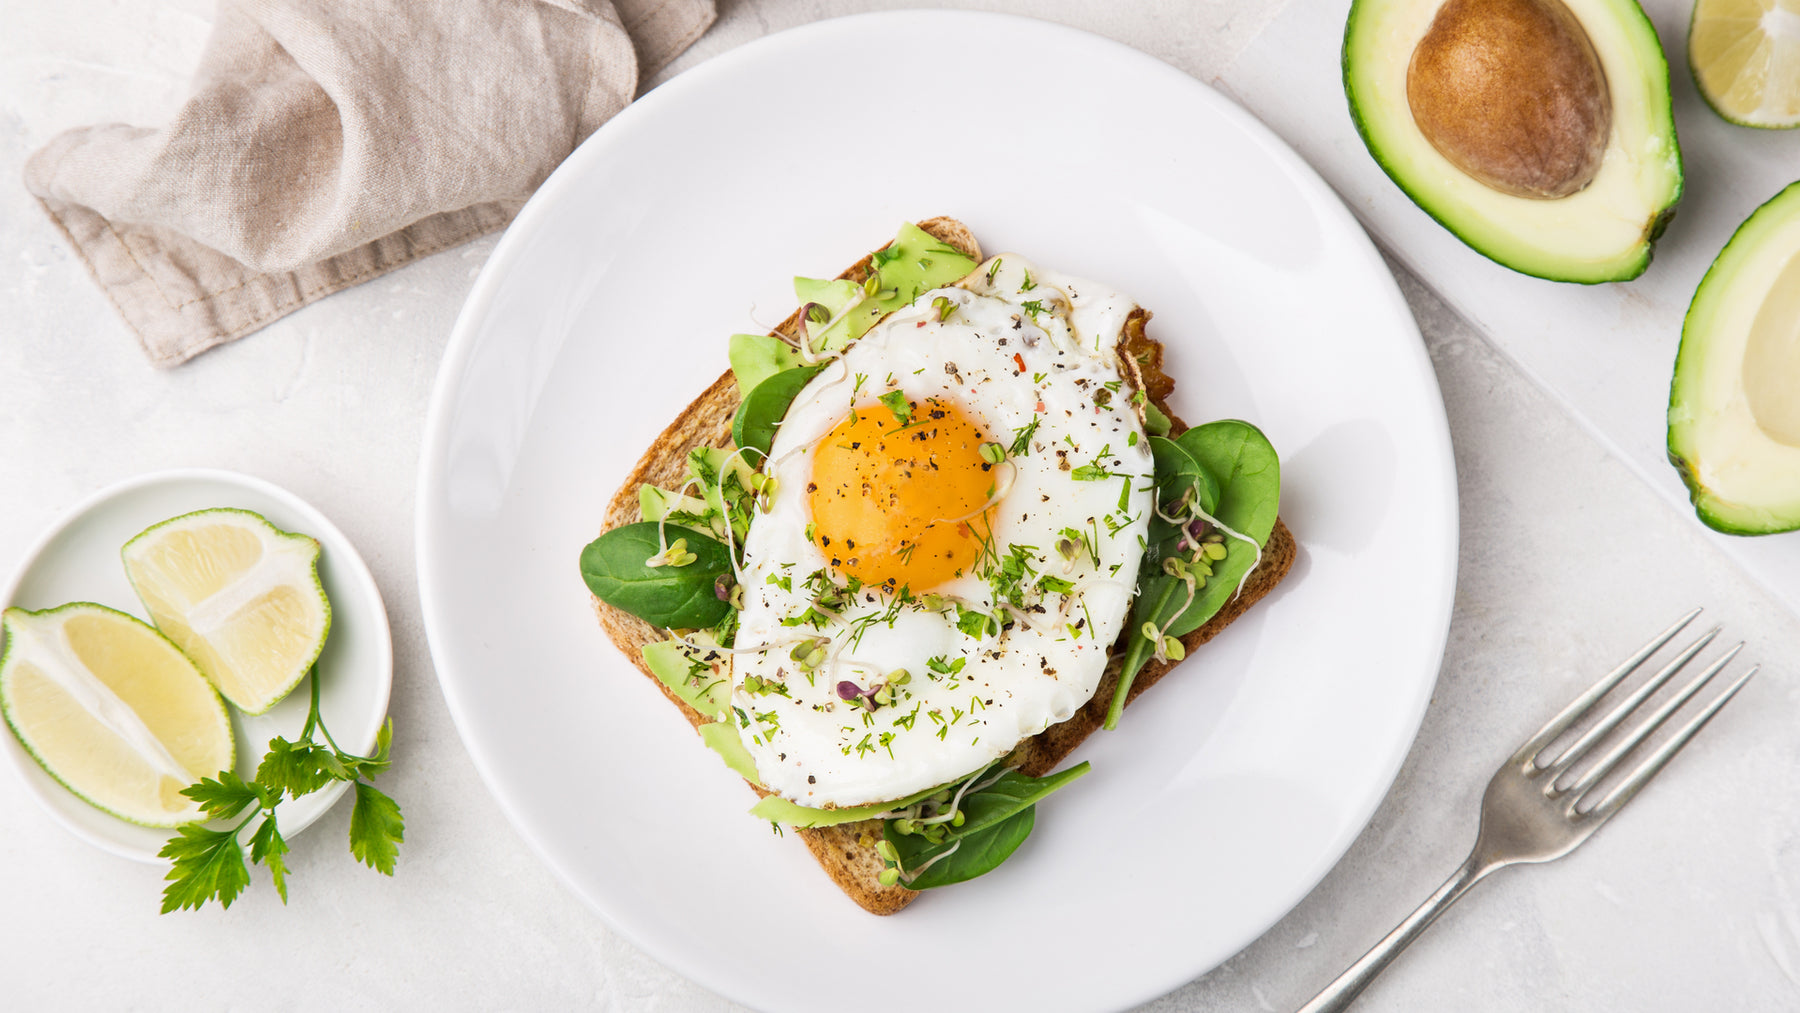 Keto Egg Fast Diet: Rules, Benefits, Risks, and Sample Recipes